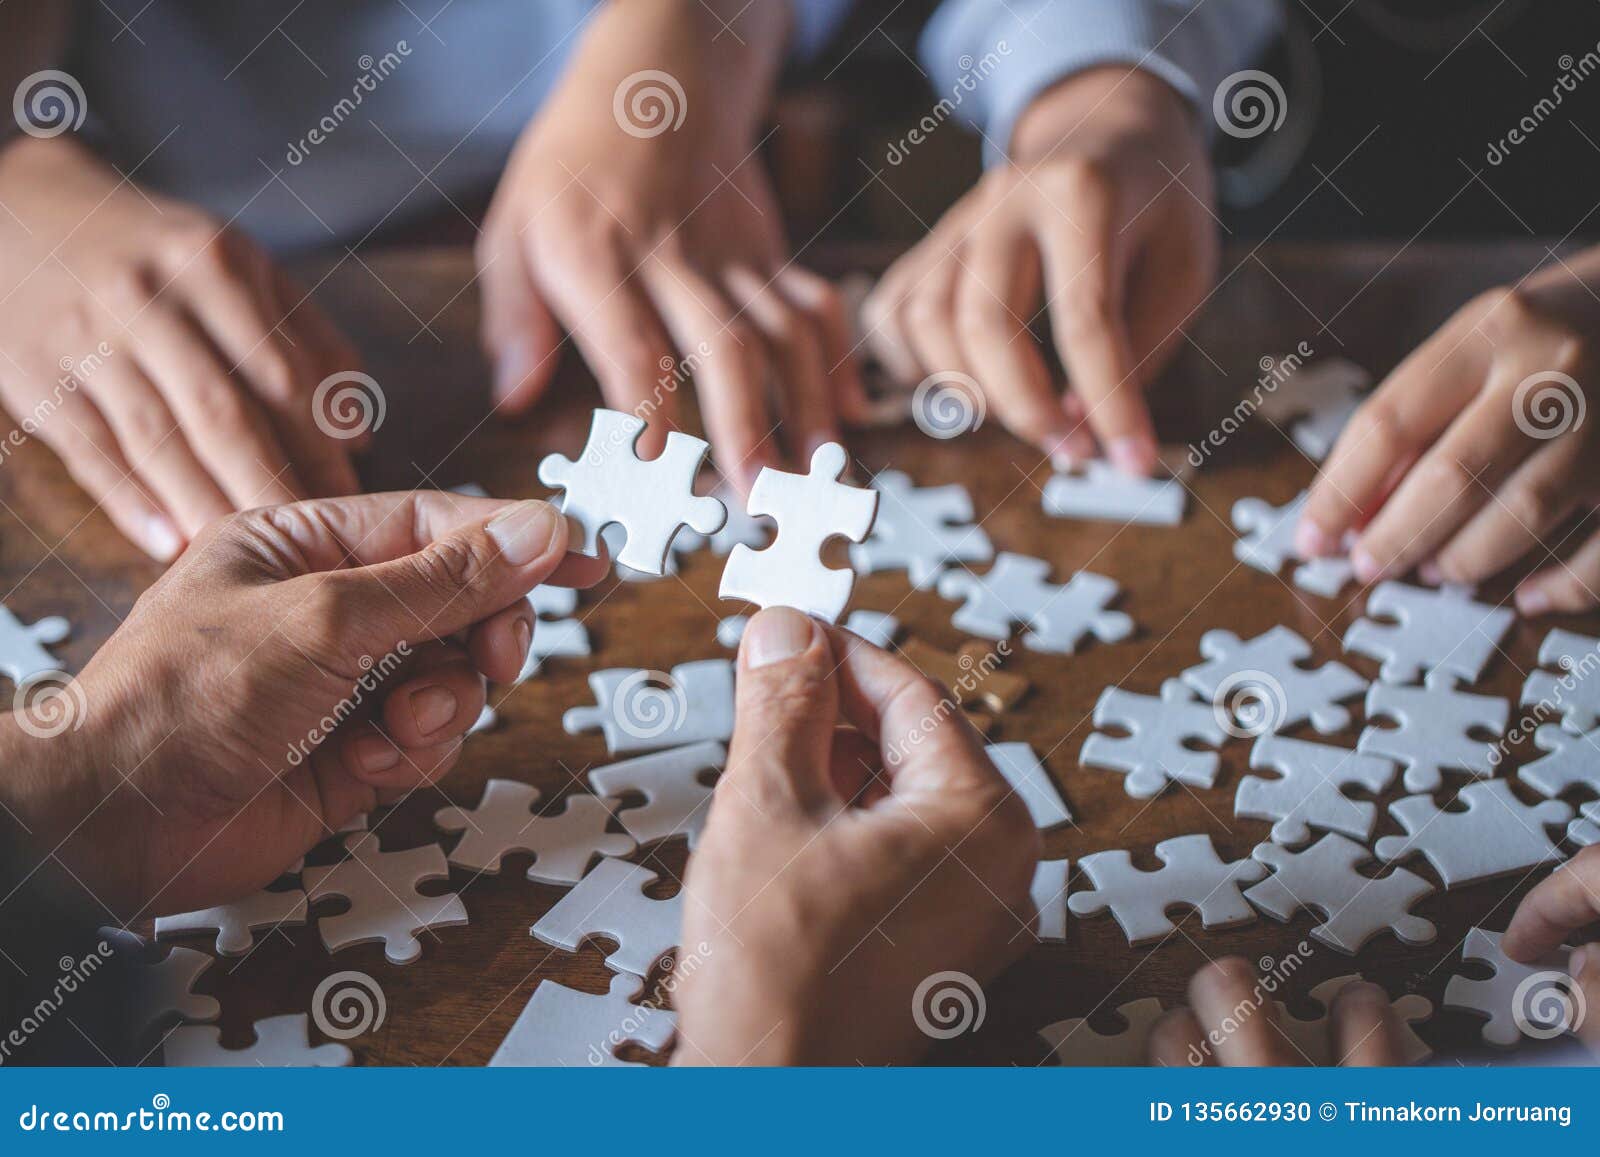 Puzzle together steam фото 102